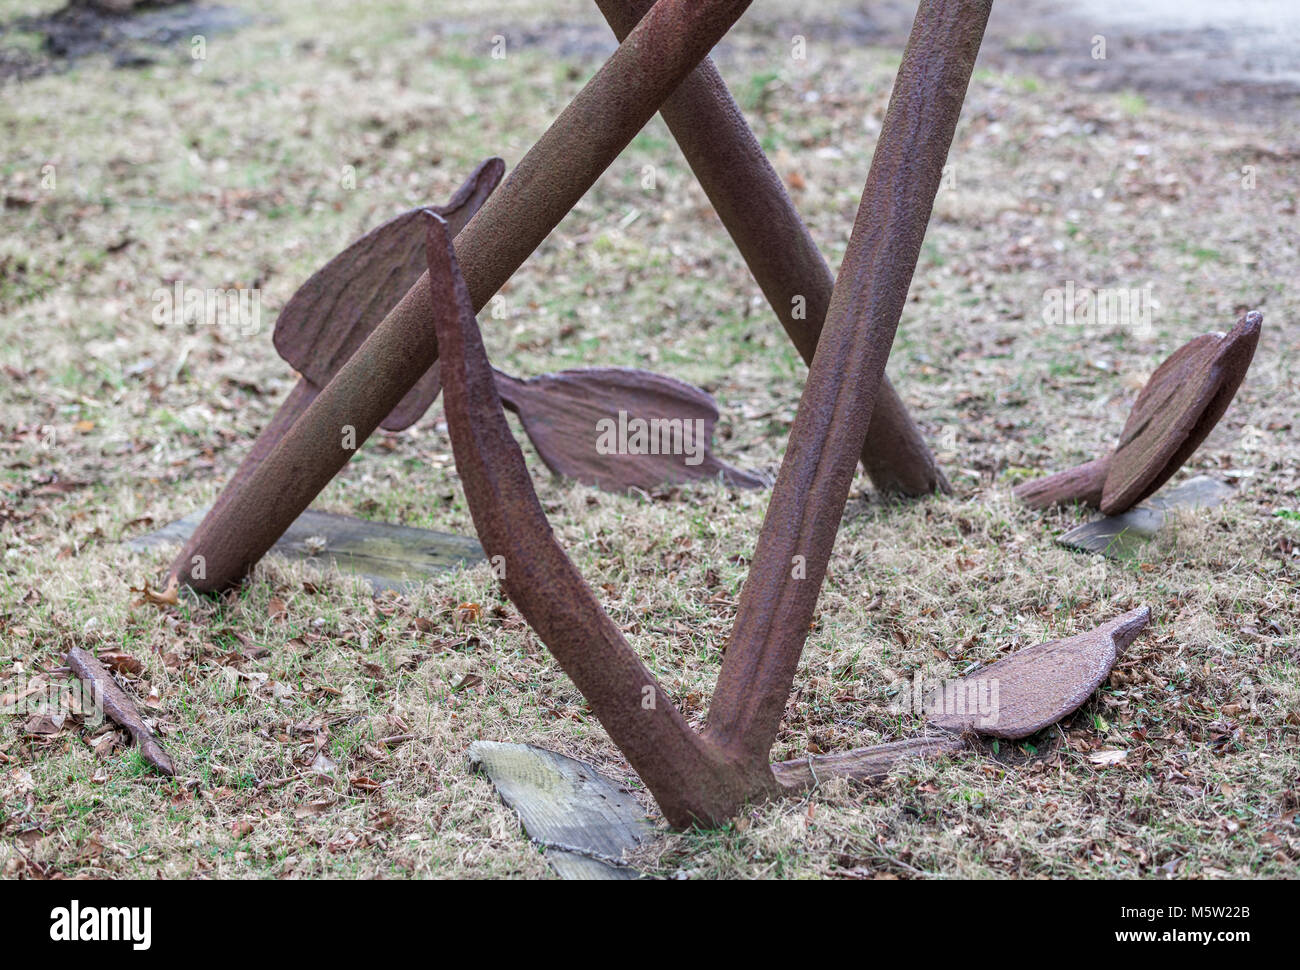 detail of three rusted anchors partially in the ground Stock Photo